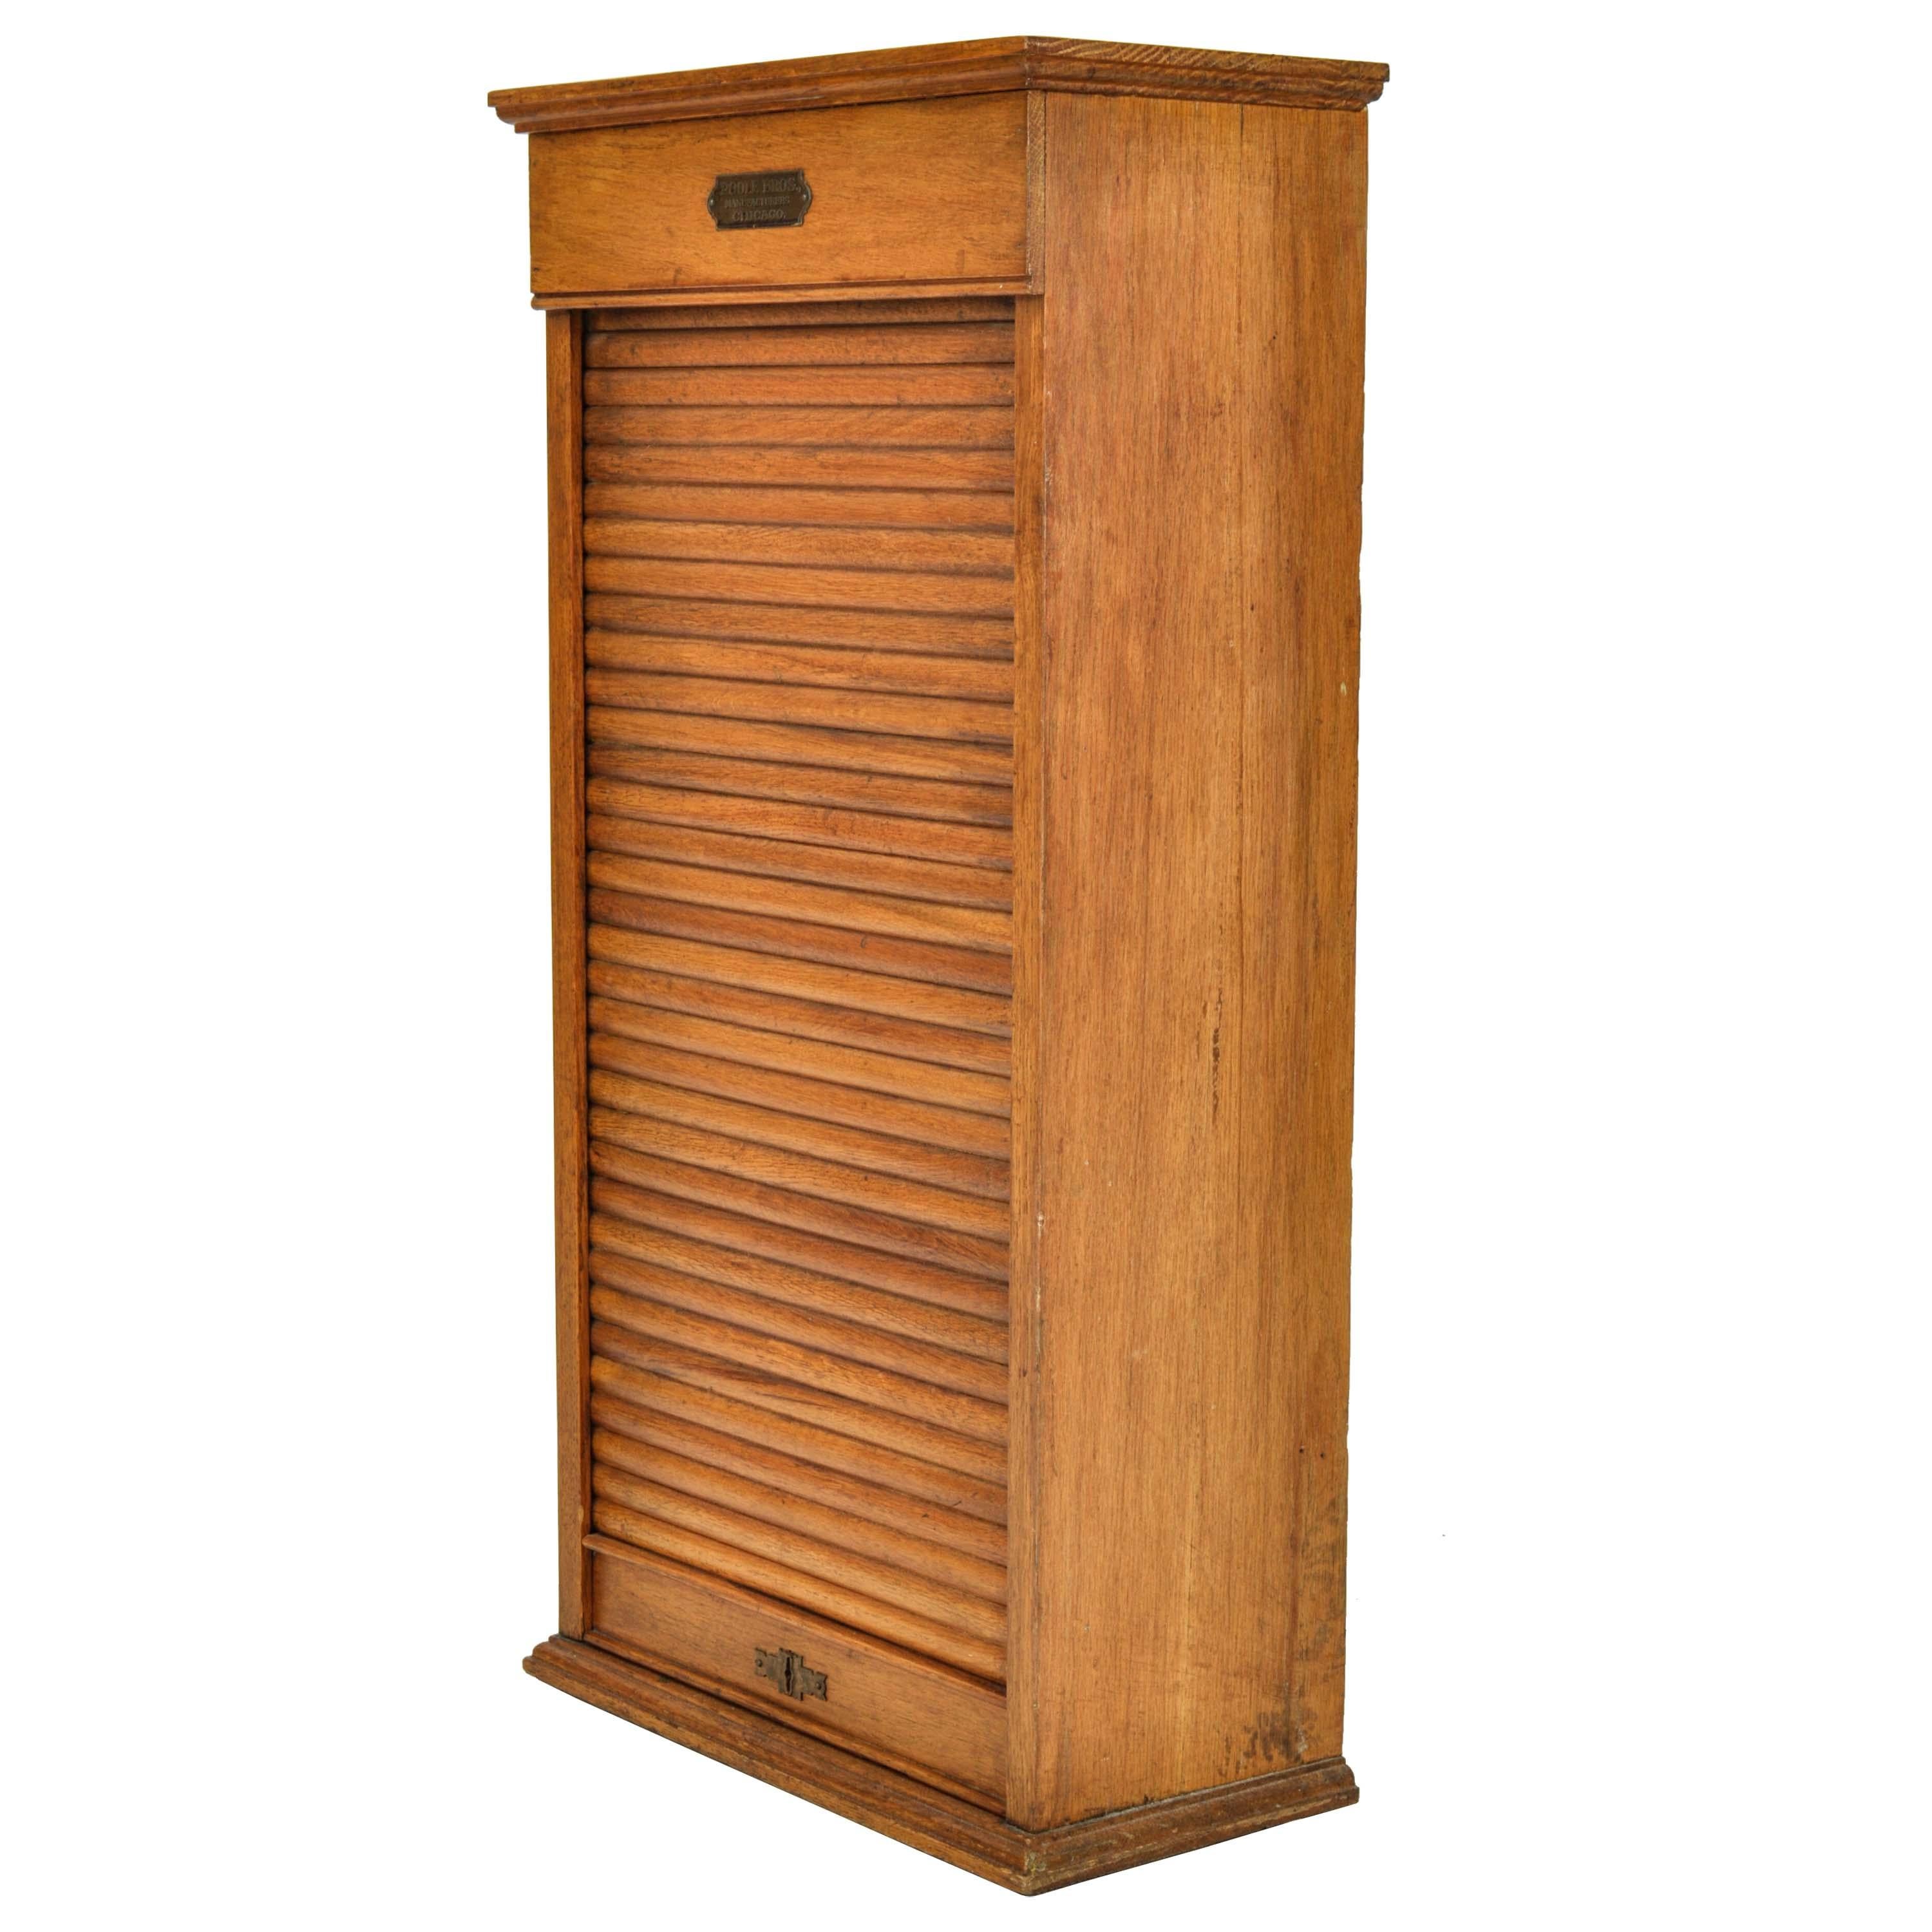 Antique American oak roll/tambour top Railway ticket cabinet, circa 1920, by Poole Bros., of Chicago.
The cabinet having a locking tabour roll, that runs free and smooth, enclosed are a series of shelves to store railway tickets. The base has a